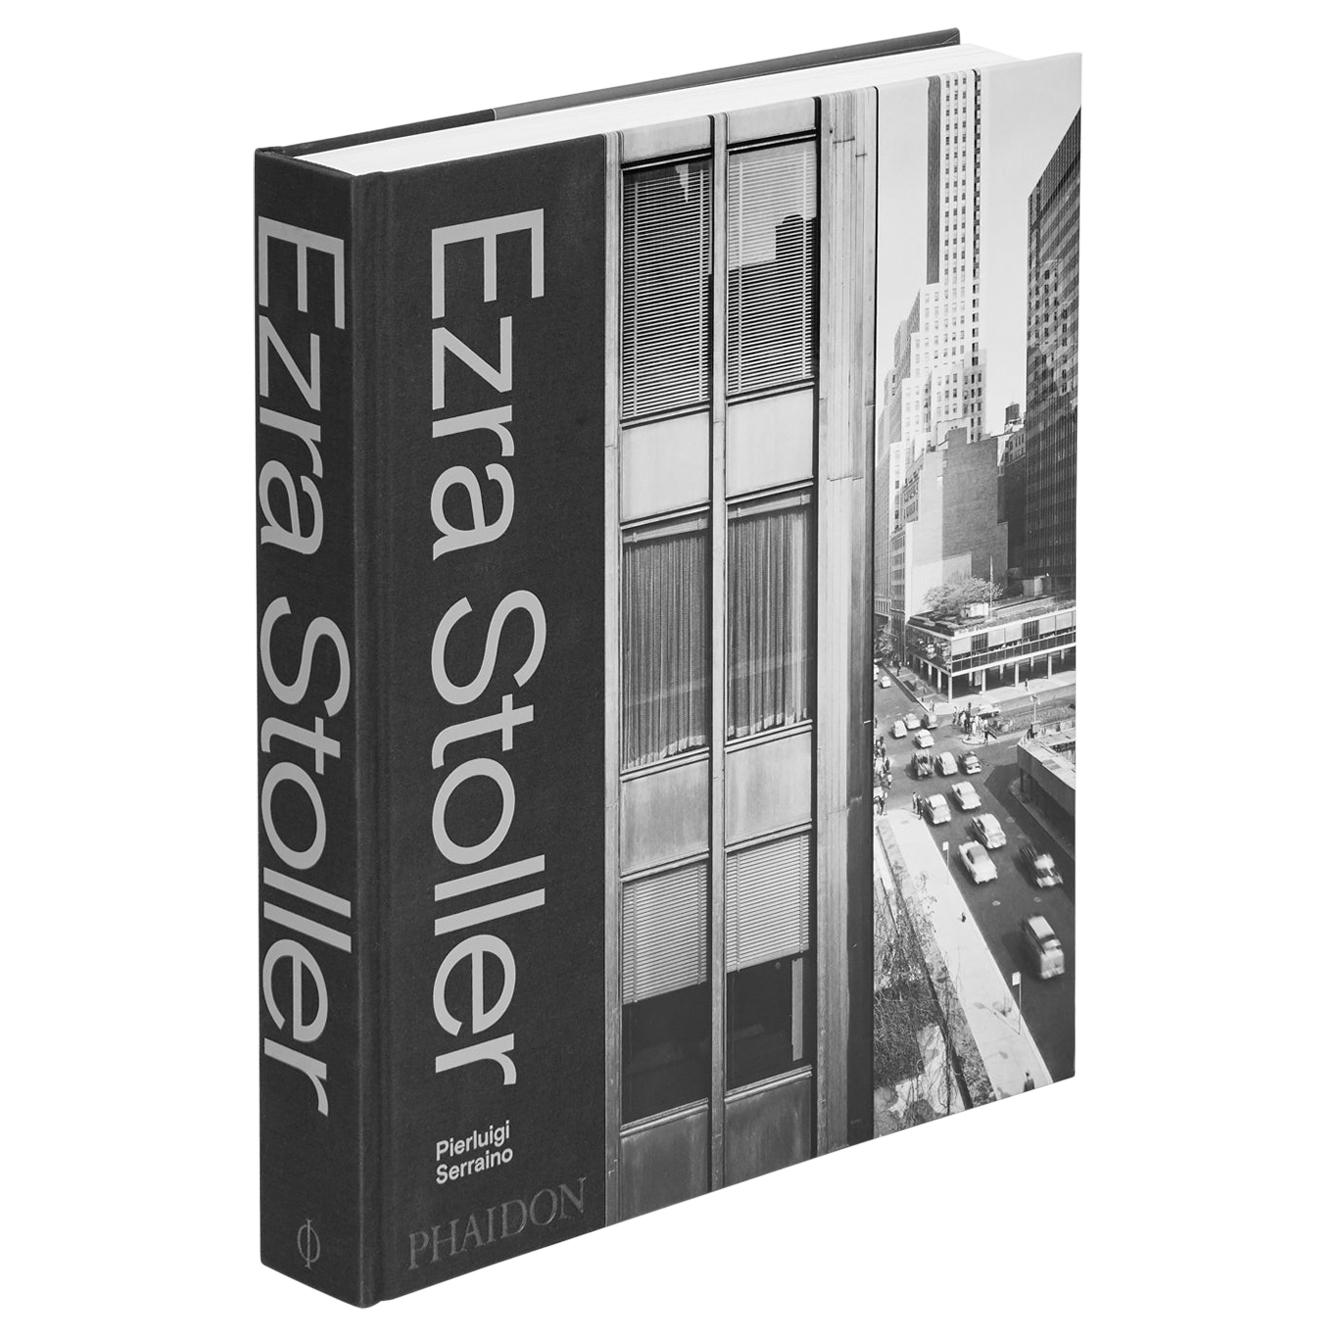 Ezra Stoller, a Photographic History of Modern American Architecture